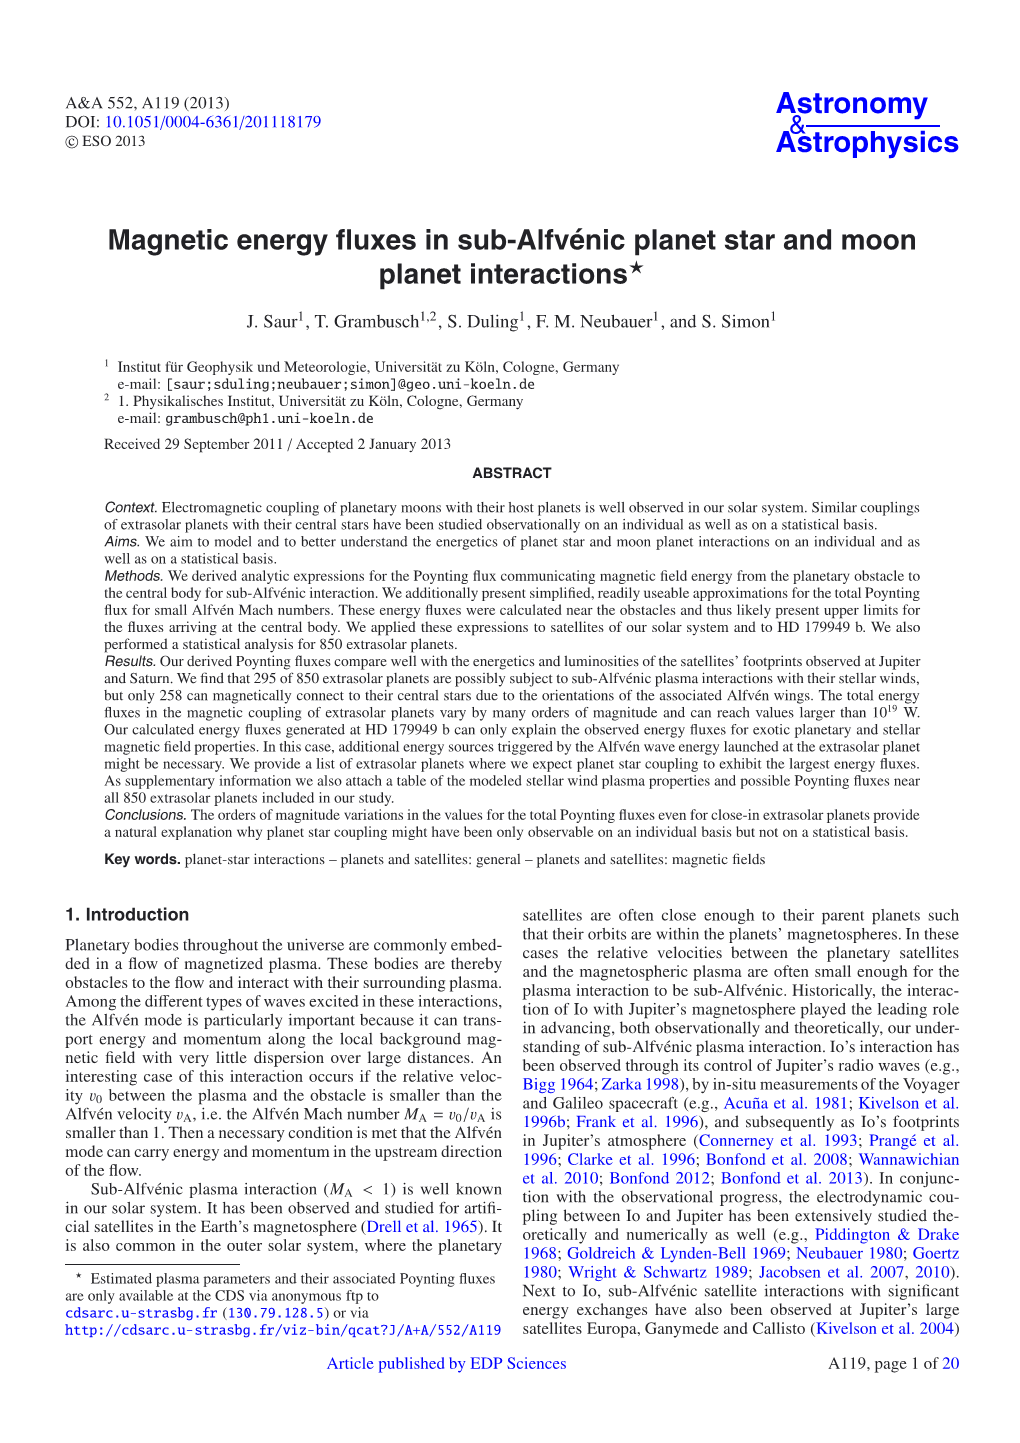 Magnetic Energy Fluxes in Sub-Alfvénic Planet Star and Moon